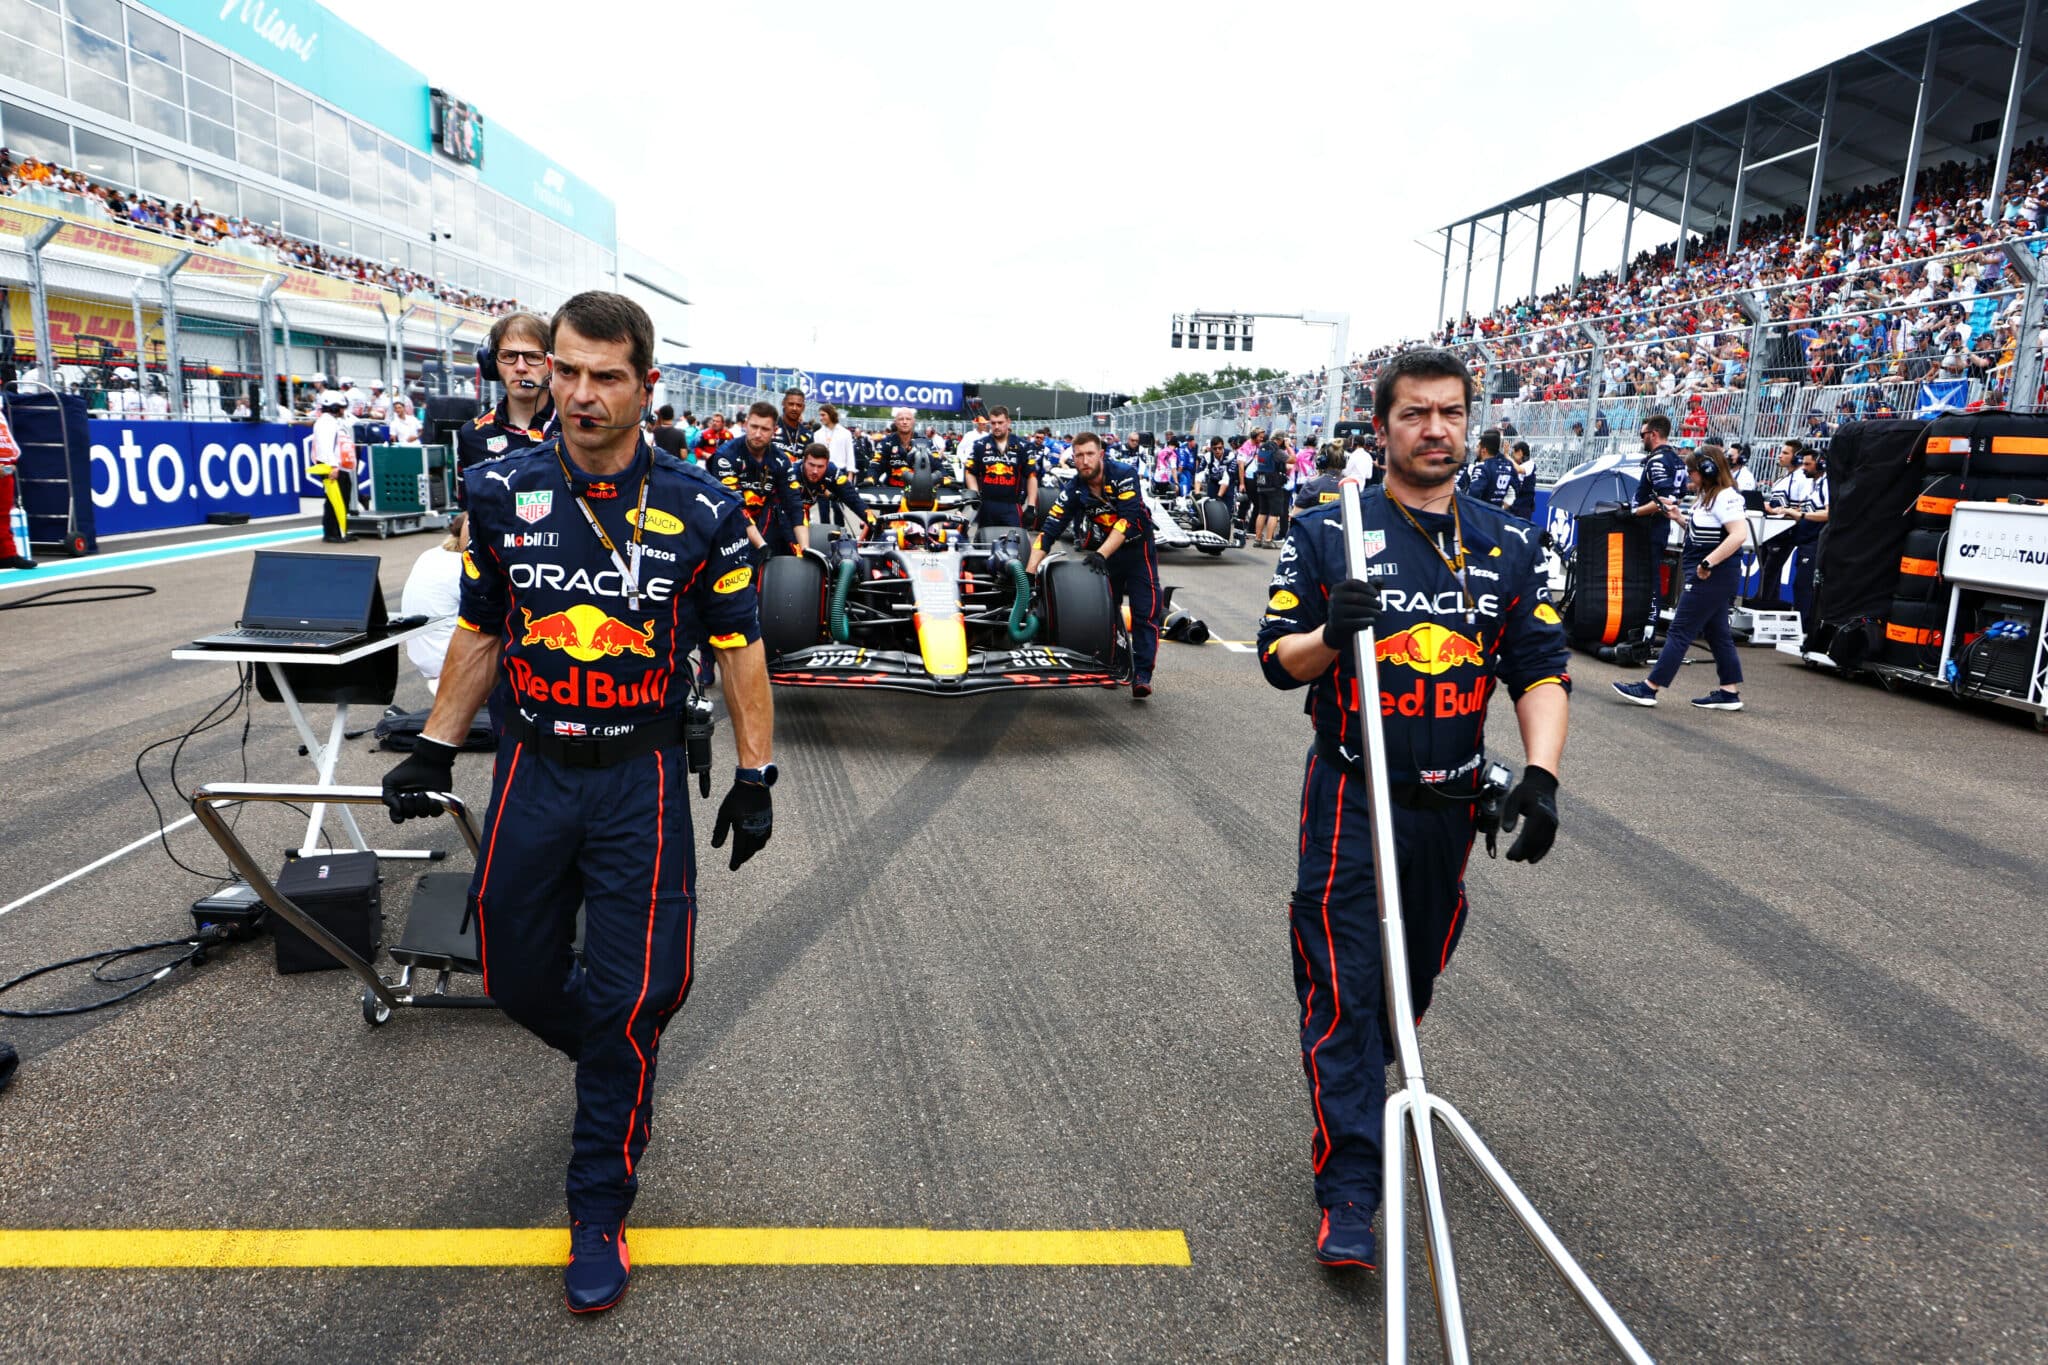 MIAMI, FLORIDA - MAY 08: The Red Bull Racing team prepare on the grid prior to the F1 Grand Prix of Miami at the Miami International Autodrome on May 08, 2022 in Miami, Florida